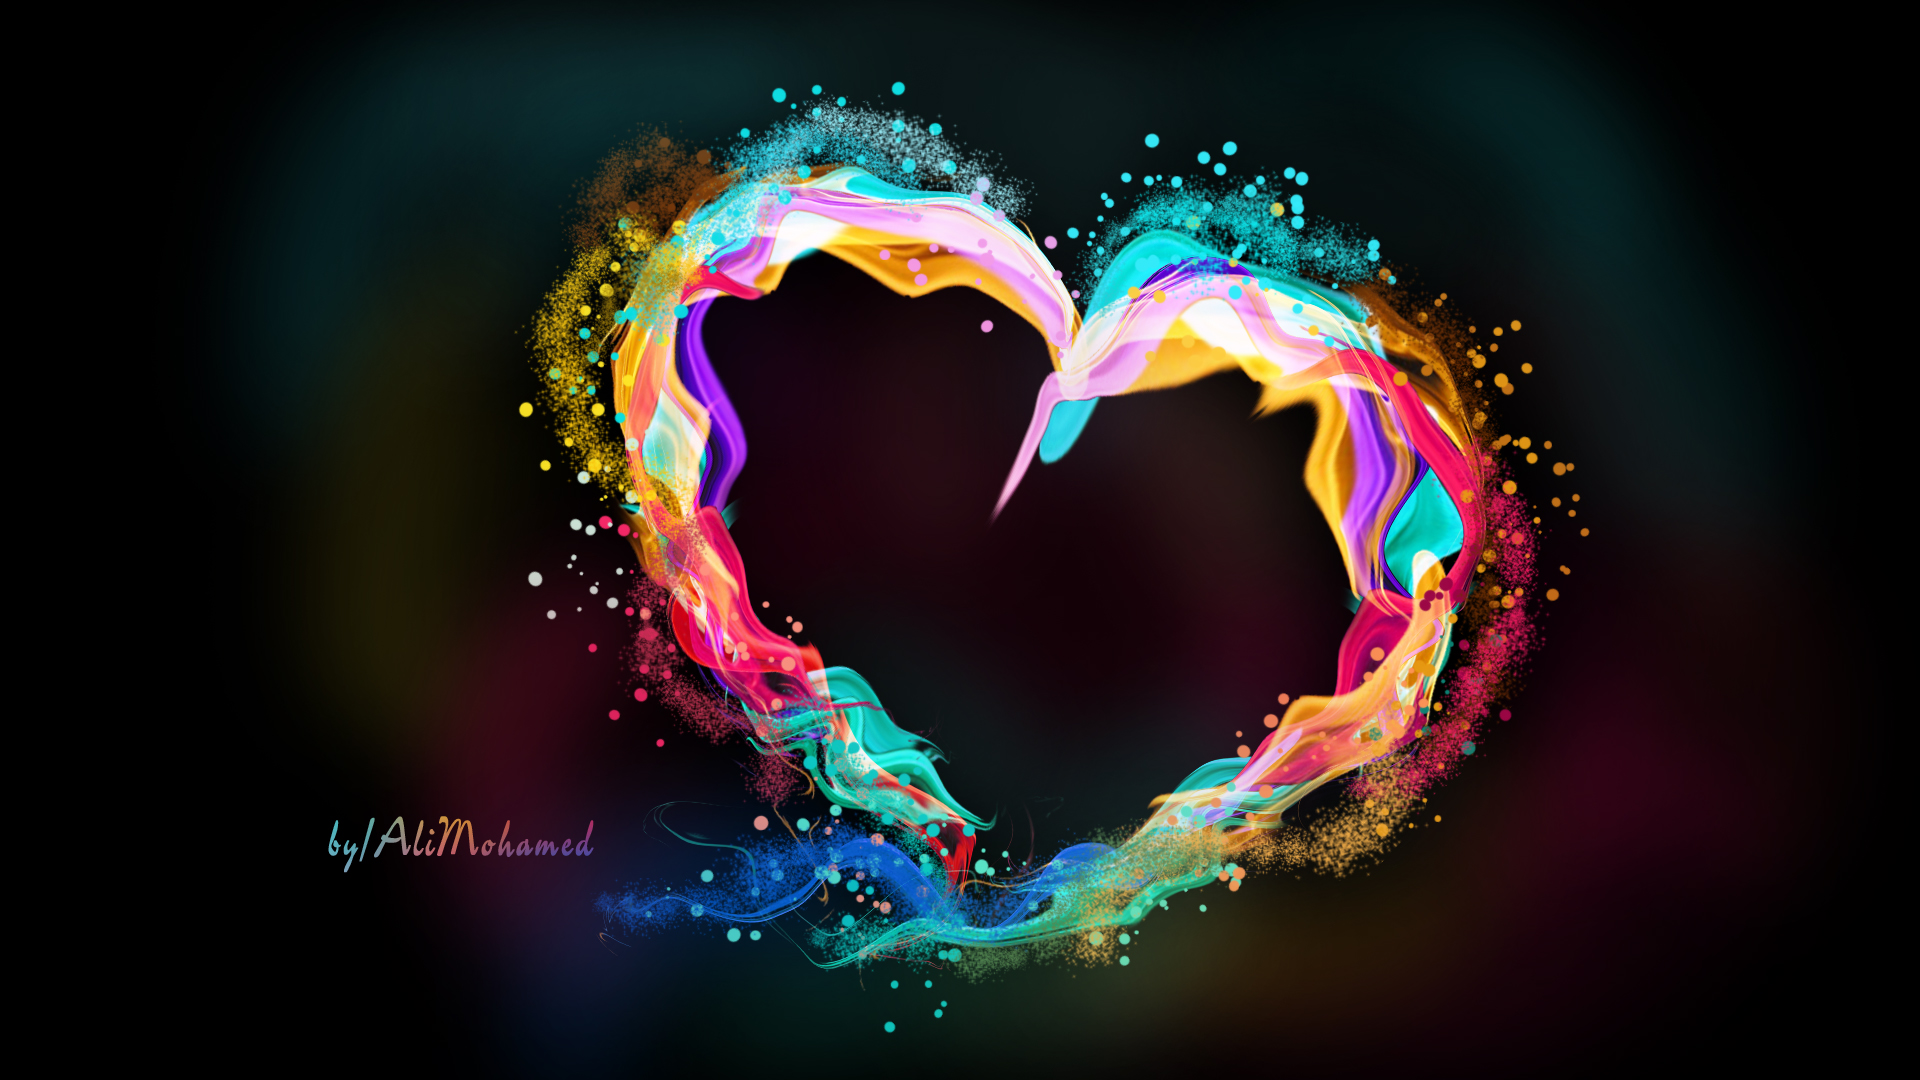 General 1920x1080 photoshopped heart simple background colorful digital art cyan